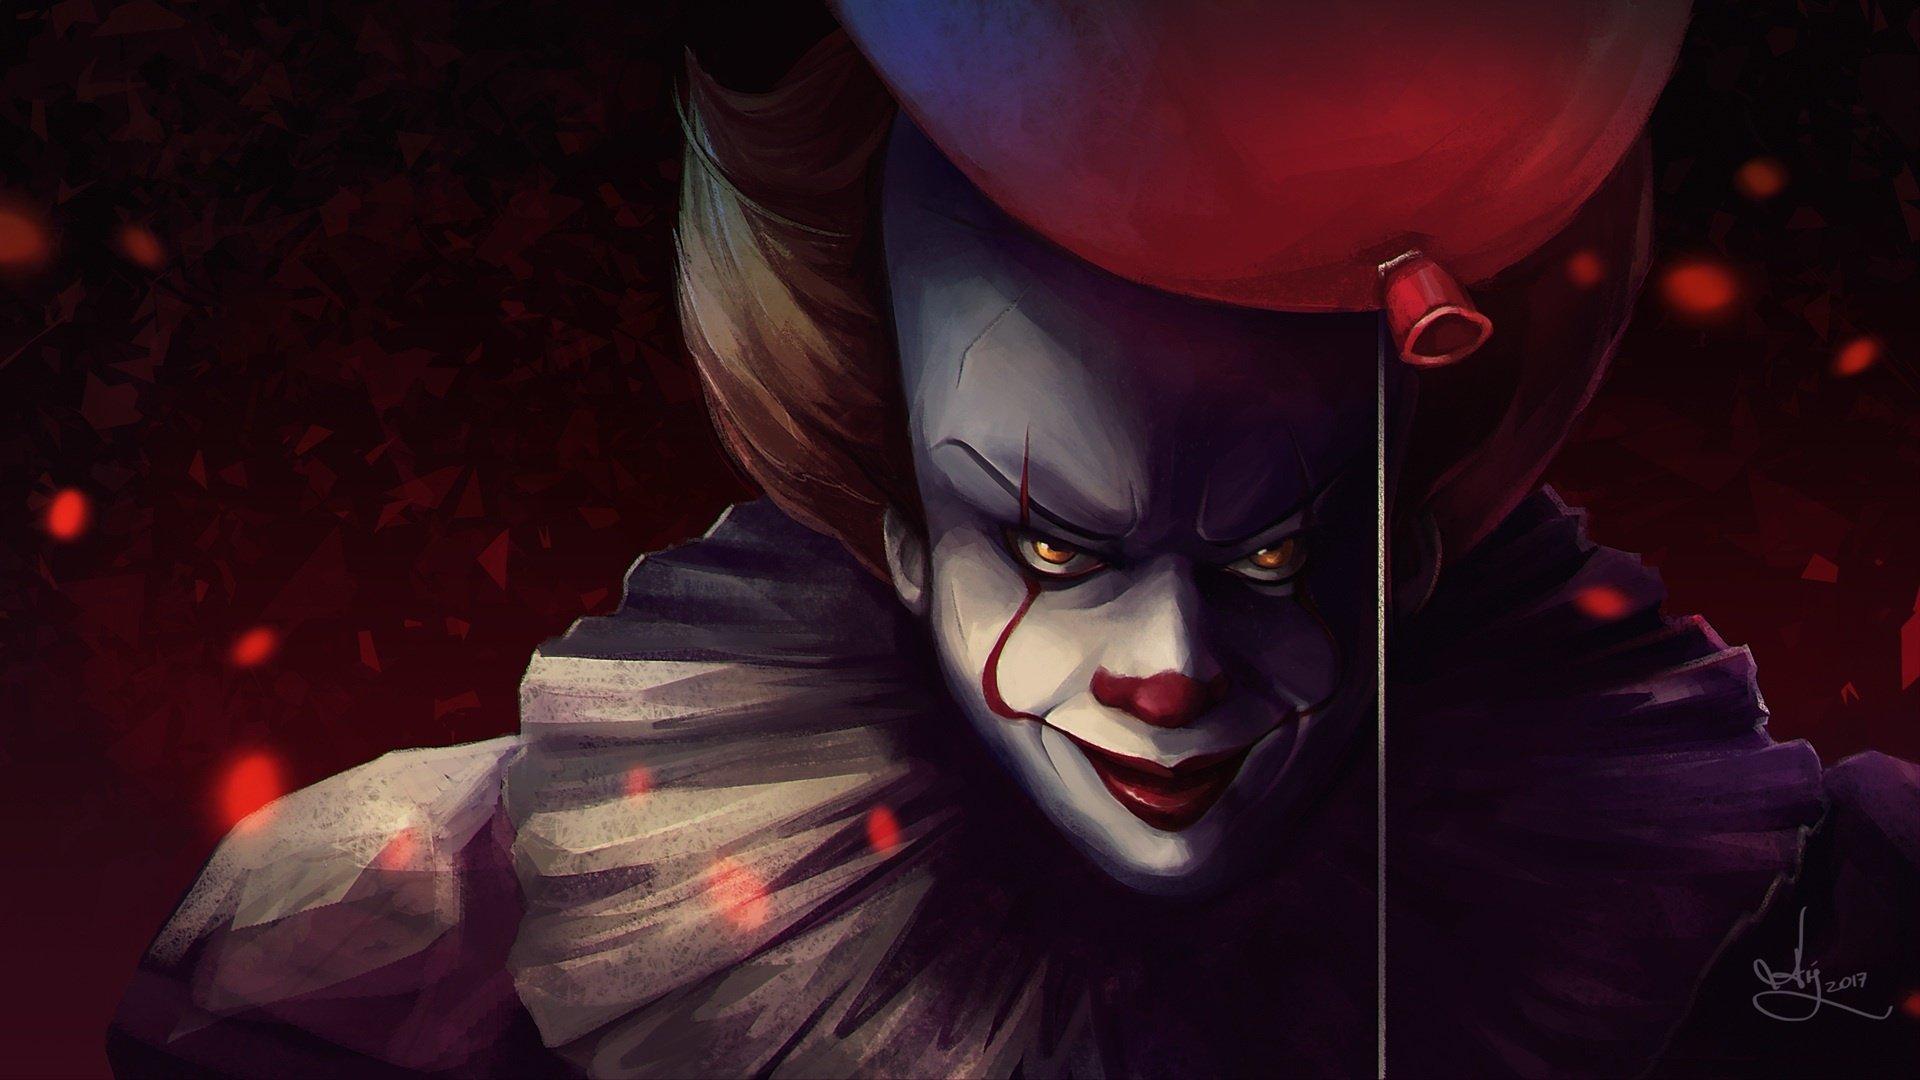 Hd Pennywise Wallpaper 1920x1080